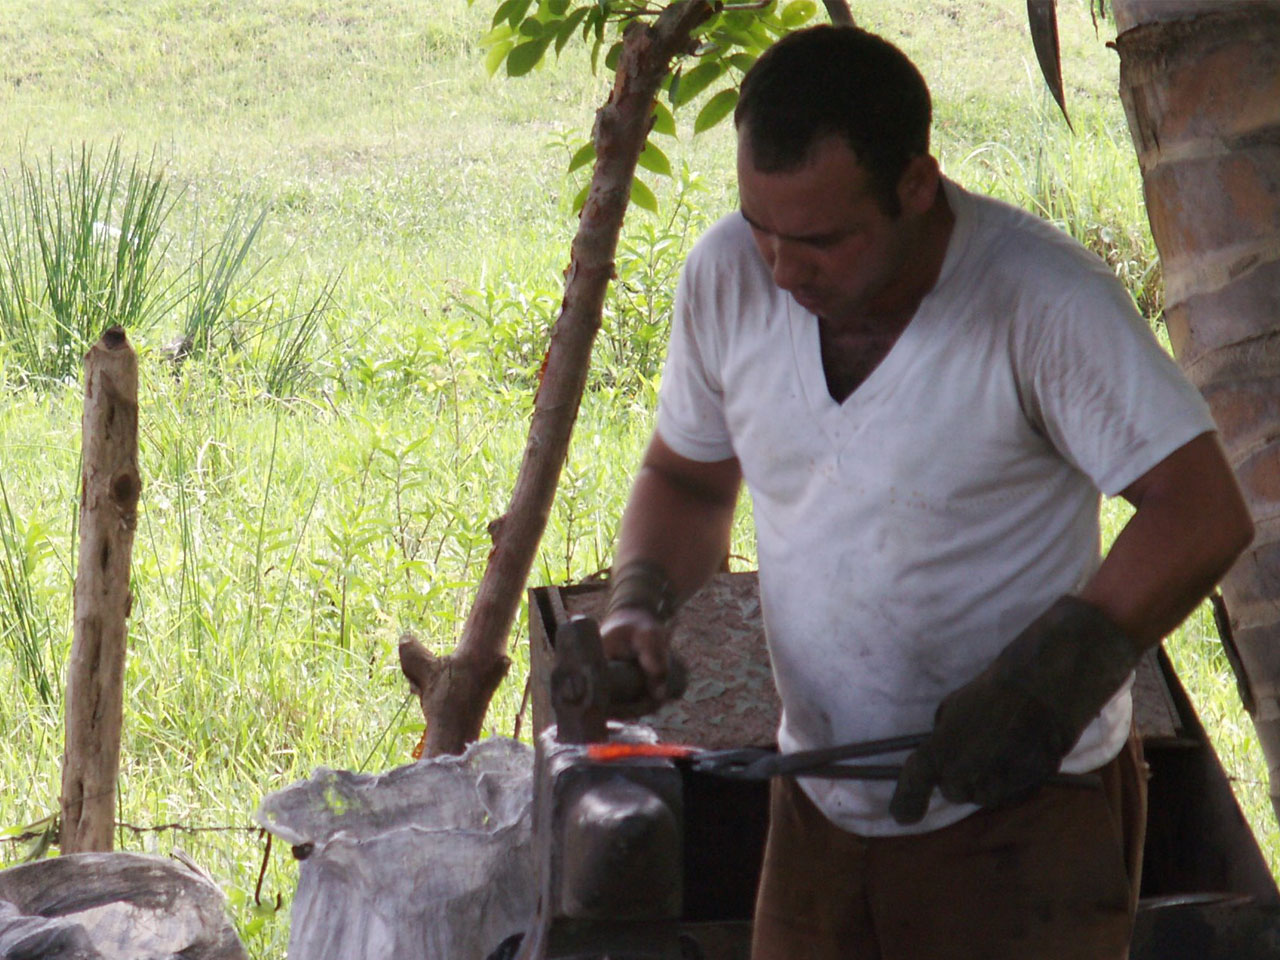 Forger working in the open, Pinar del Rio Province, Cuba